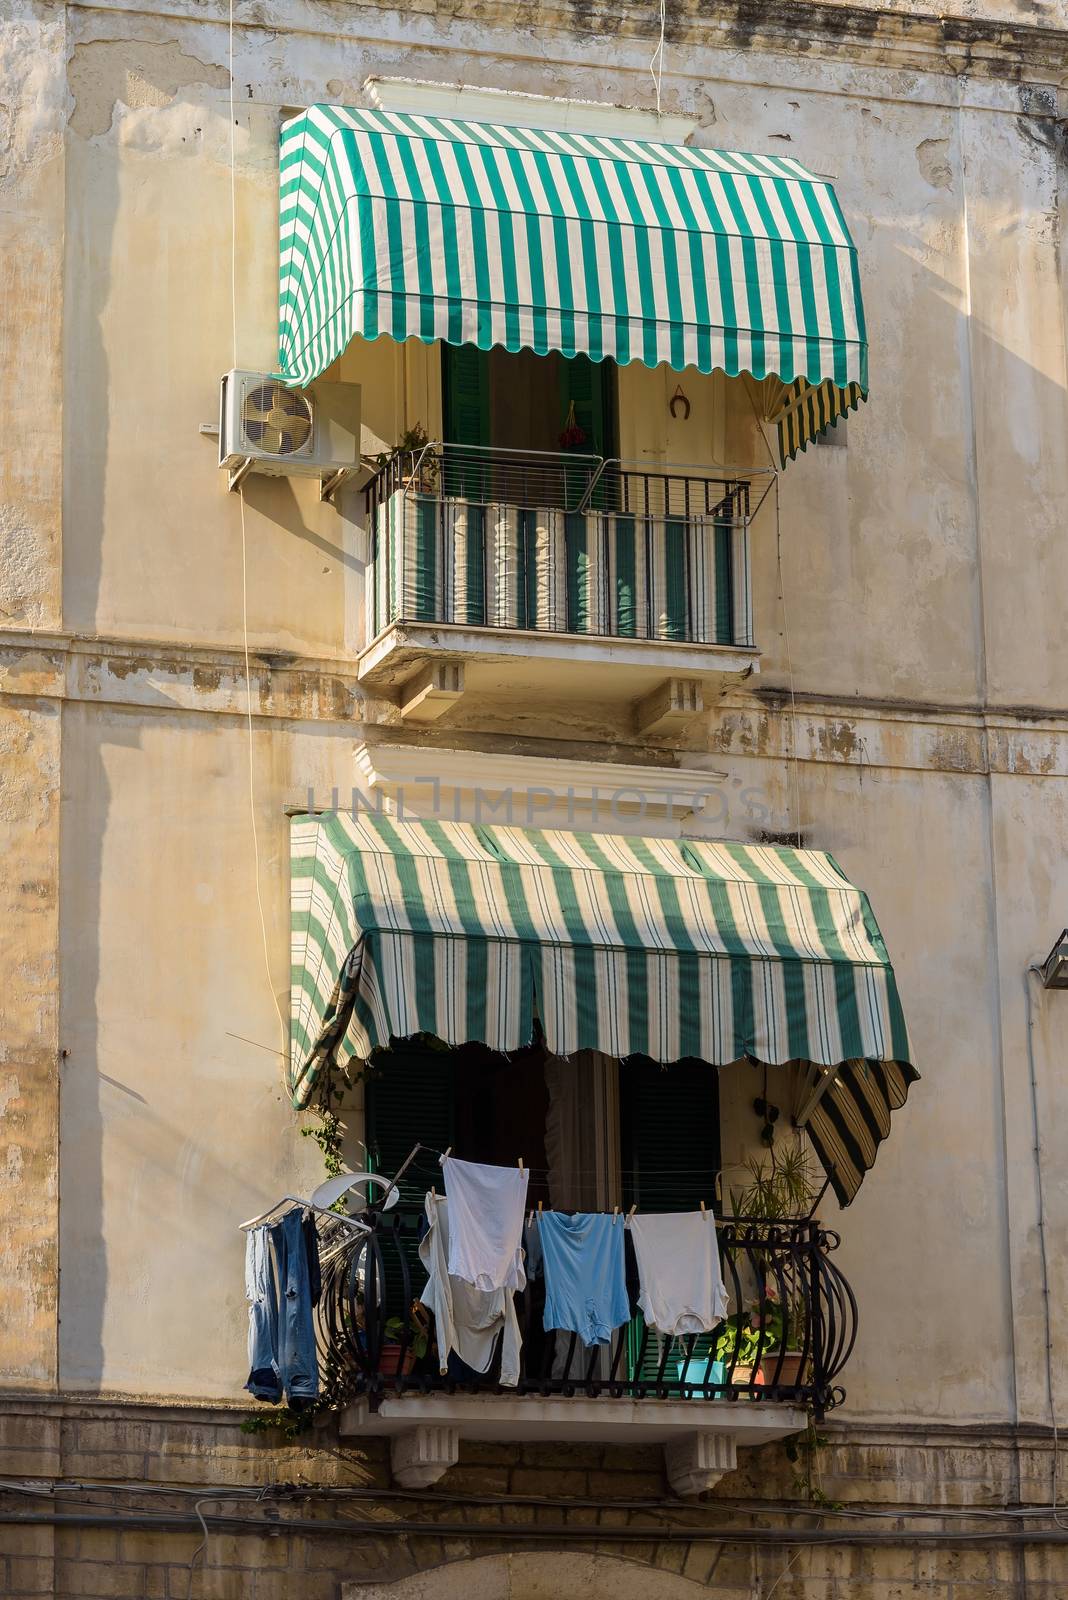 Traditional balconies with awnings and hanging laundry in Bari, Apulia, Italy